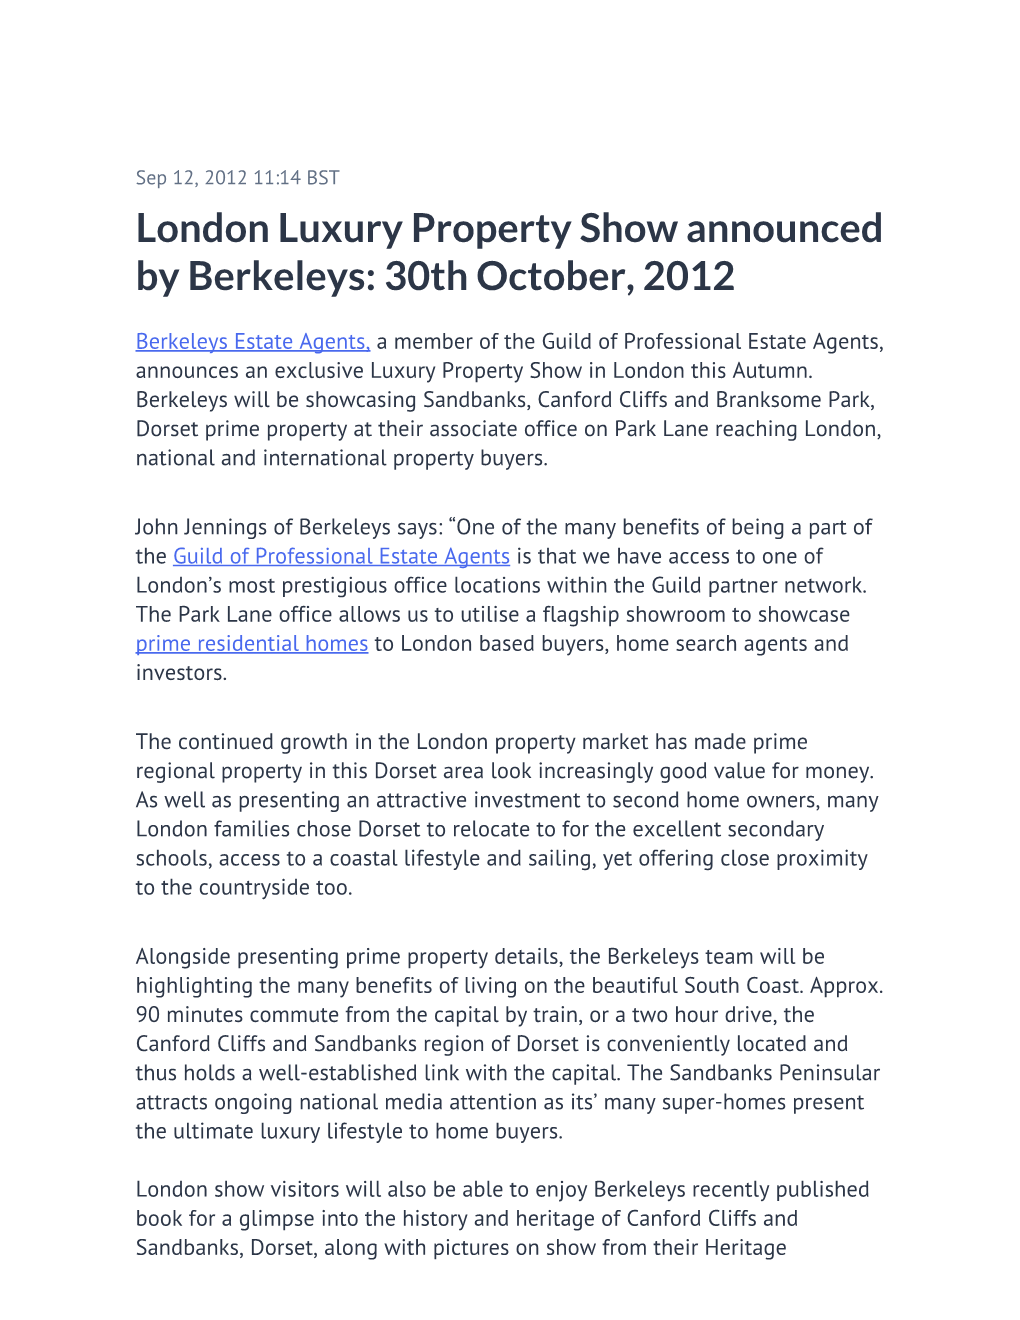 London Luxury Property Show Announced by Berkeleys: 30Th October, 2012